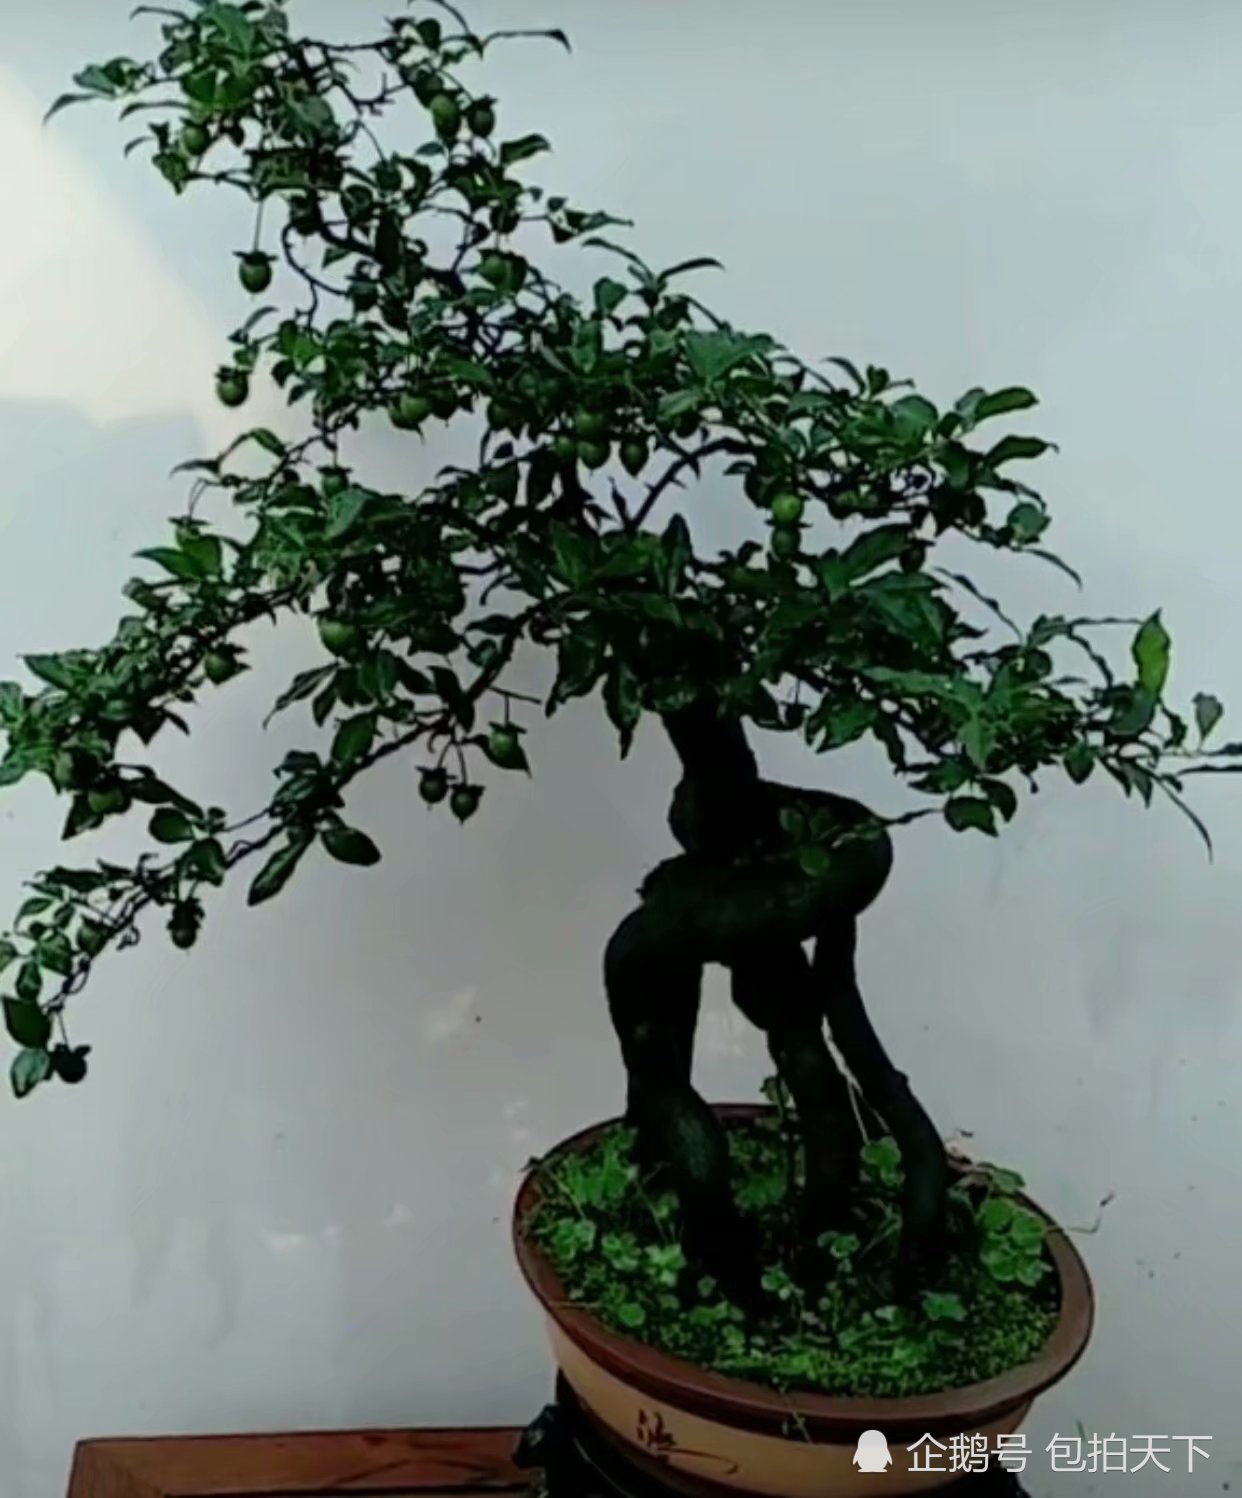 Bonsai appreciation: the composition of fresh natural landscape is suitable for a horticulturist who has been engaged in bonsai industry for many years.